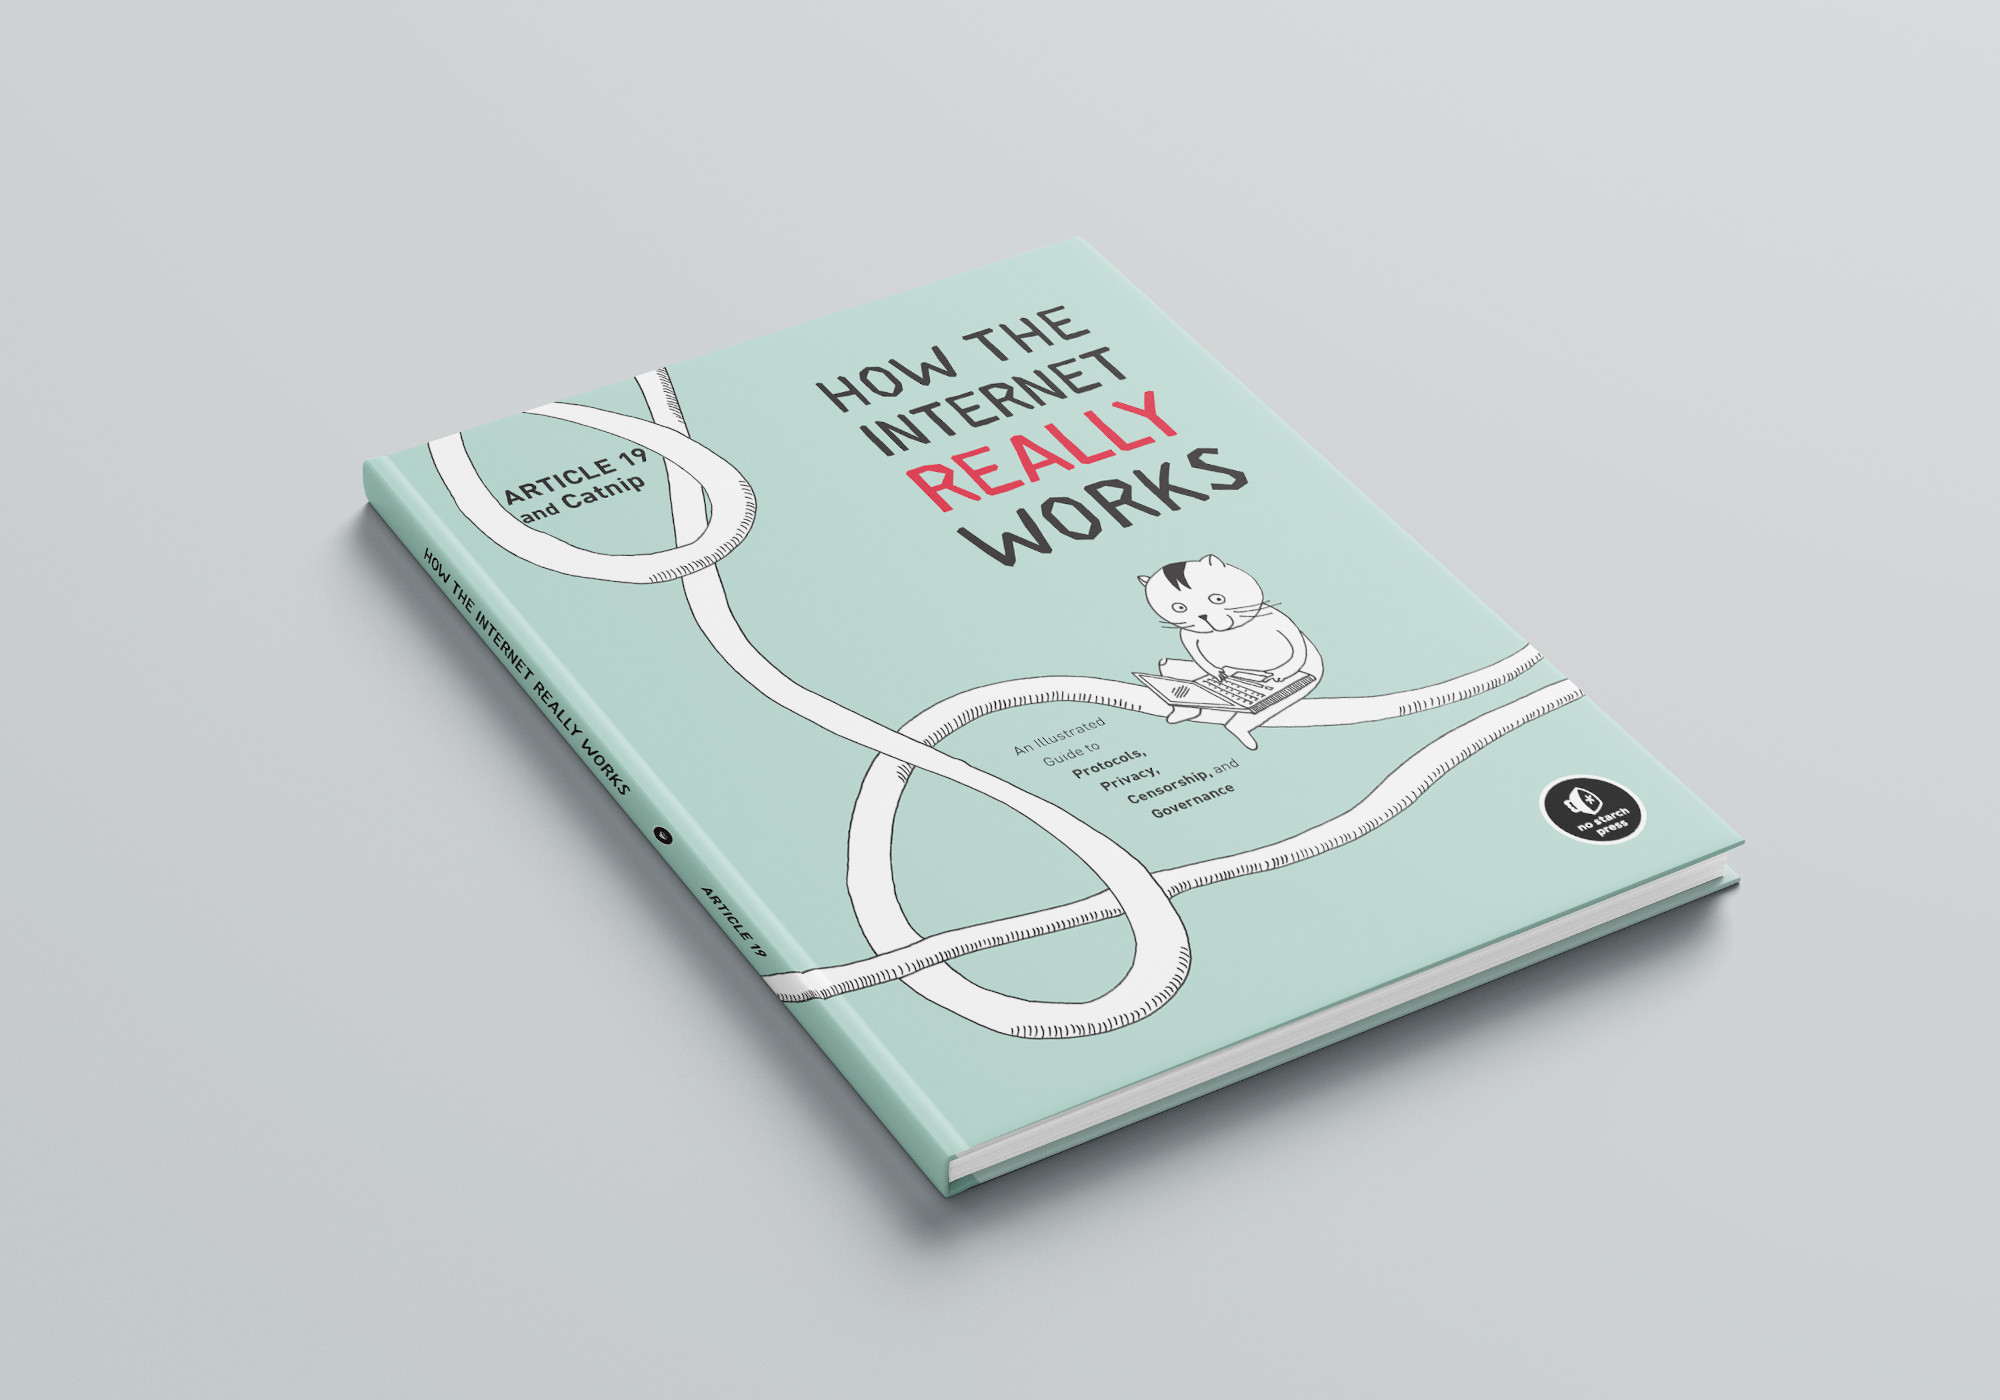 How the Internet Really Works book cover. Illustration and Layout: Ulrike Uhlig